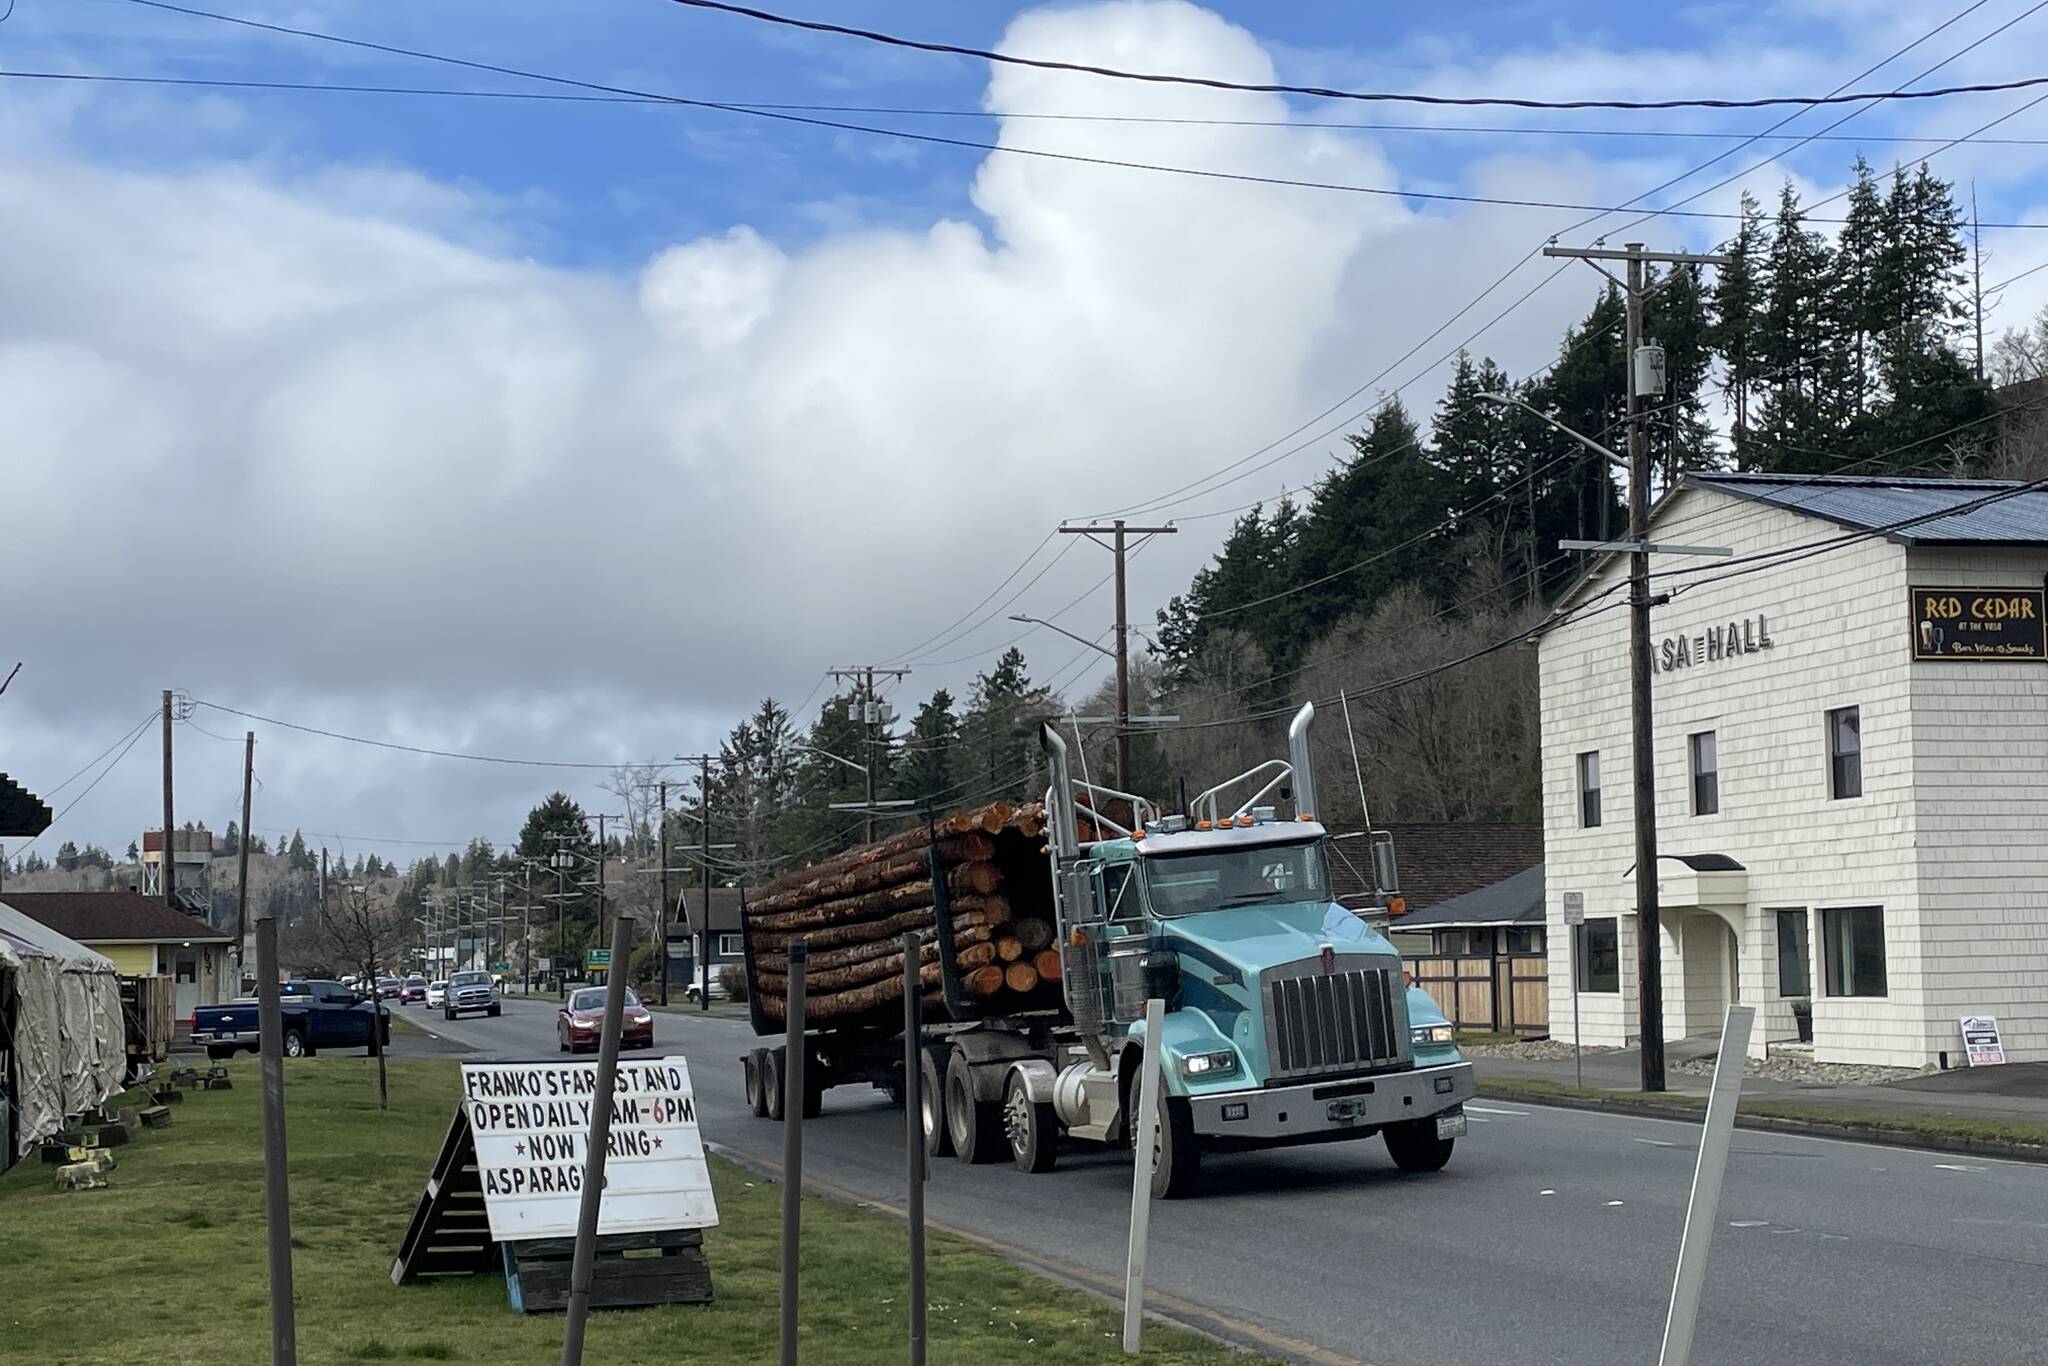 Michael S. Lockett / The Daily World 
A log truck makes its way down Riverside Avenue as Hoquiam Police Department and Public Works Department personnel directed alternating flows of traffic to ease pressure from a bridge malfunction.